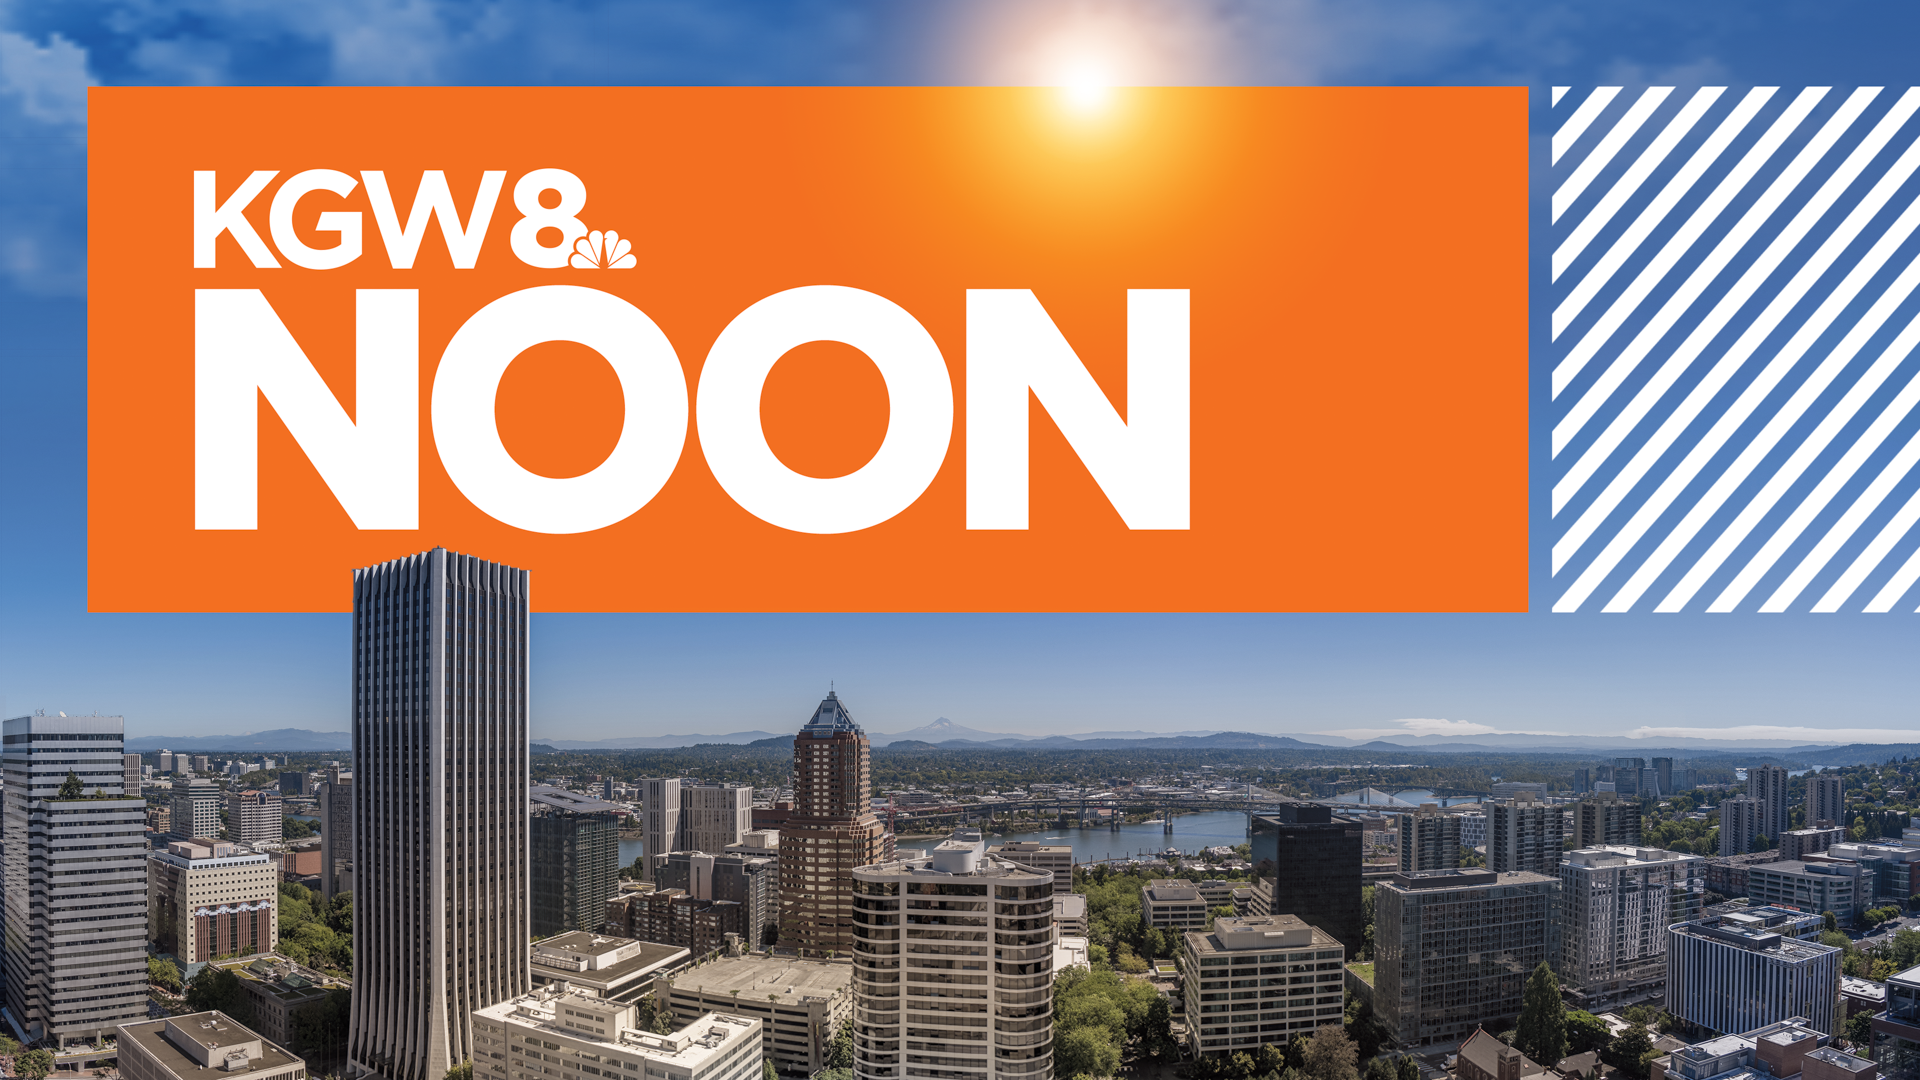 KGW Top Stories: Noon, Tuesday, August 16, 2022